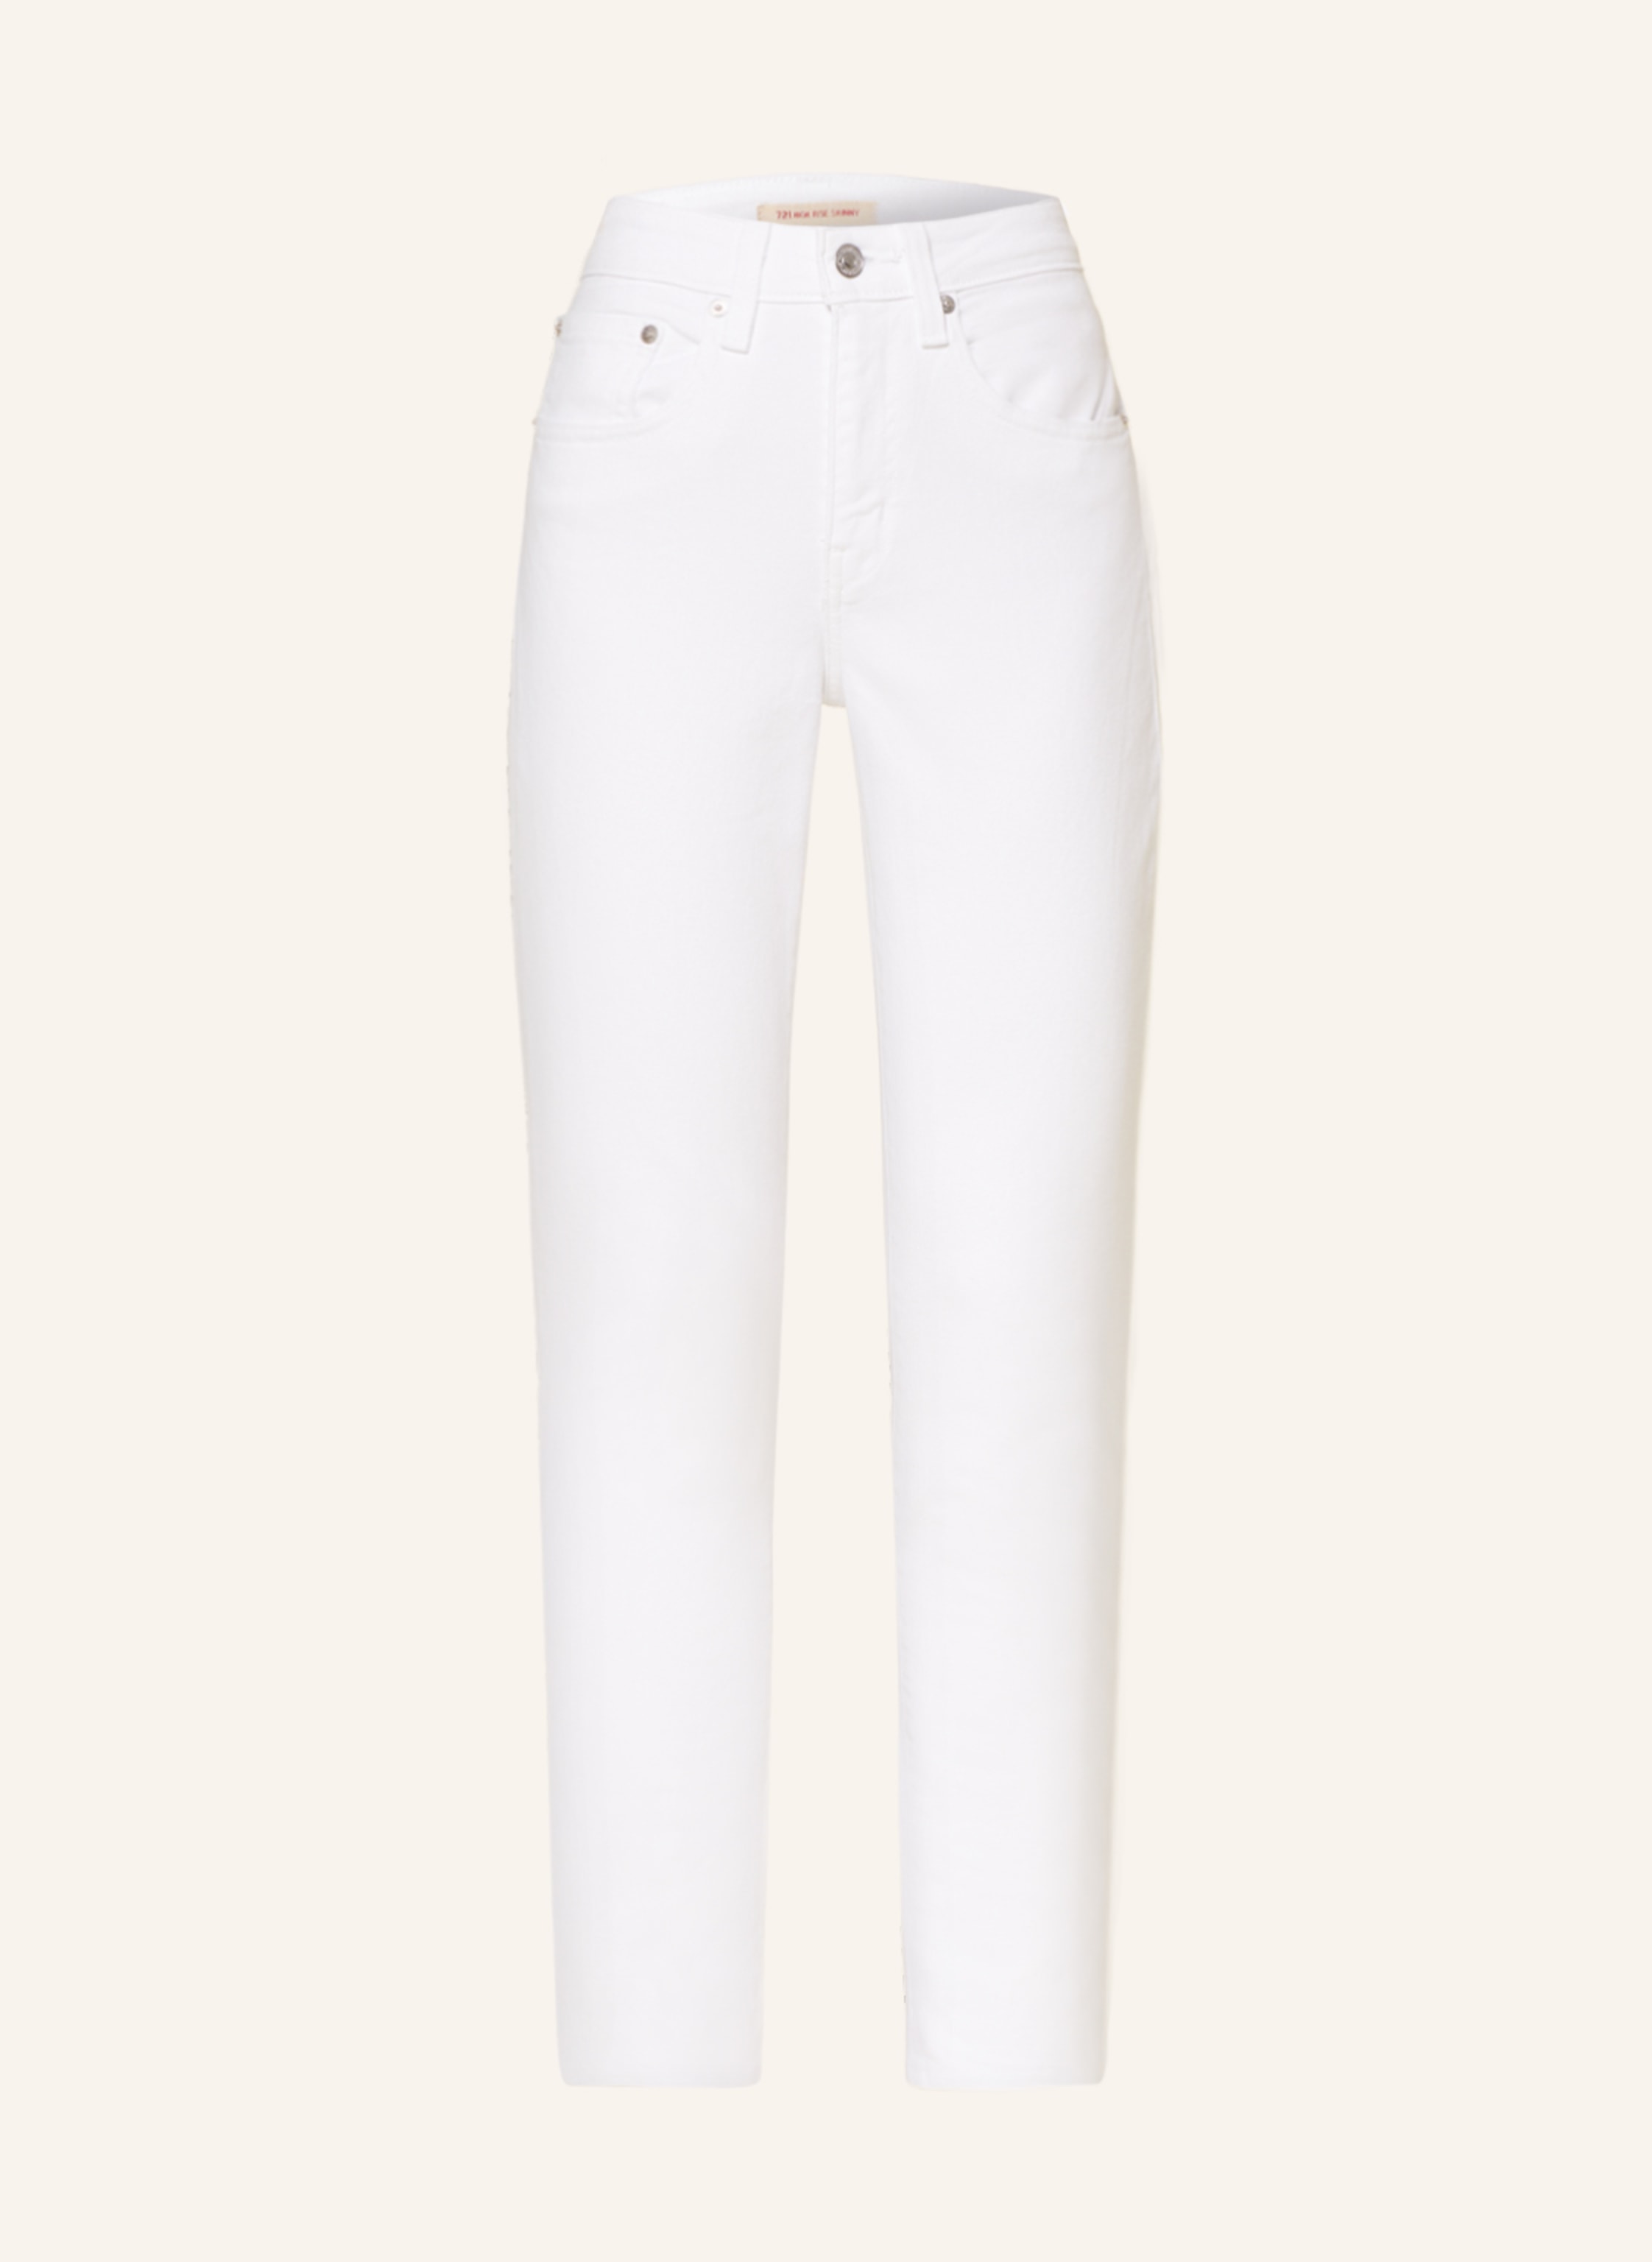 Levi's® Skinny Jeans 721 HIGH RISE SKINNY in weiss